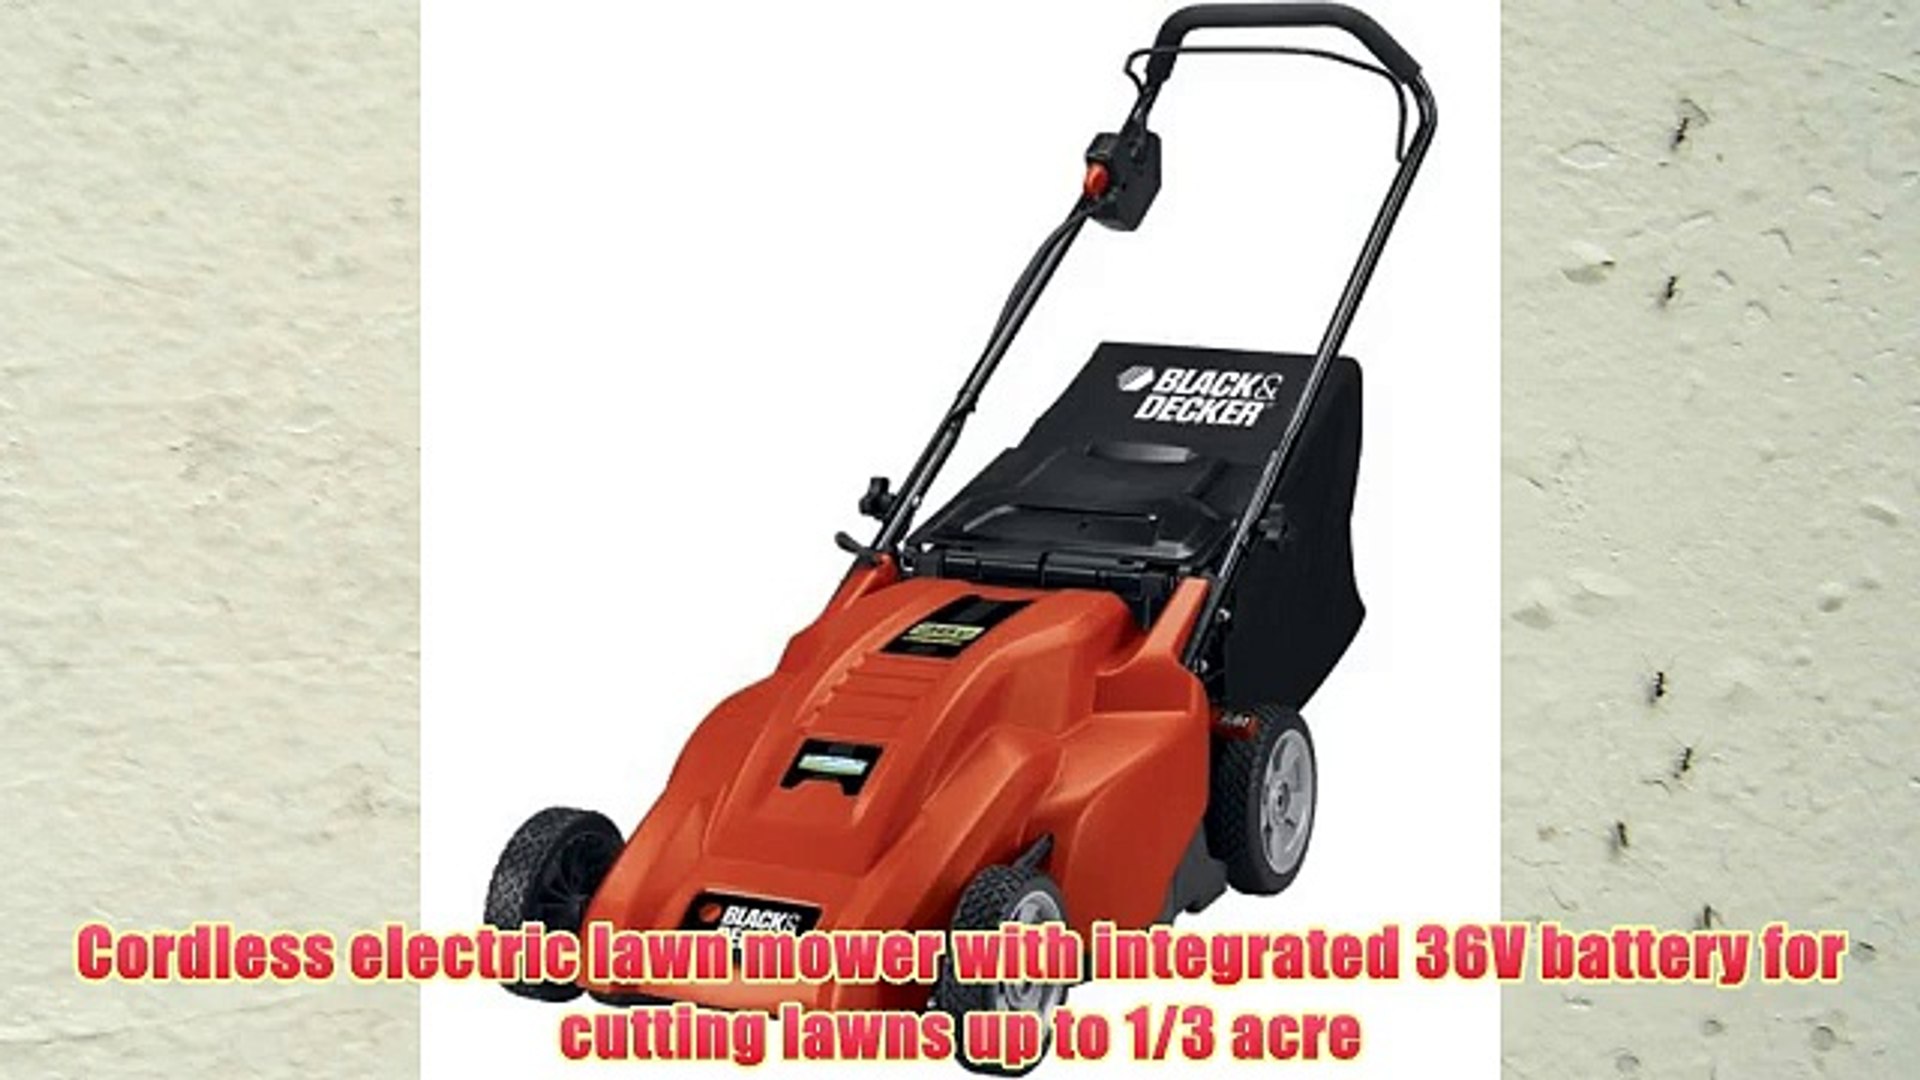 BLACK+DECKER Lawn Mower Removable Deck for String Trimmer - MTC220